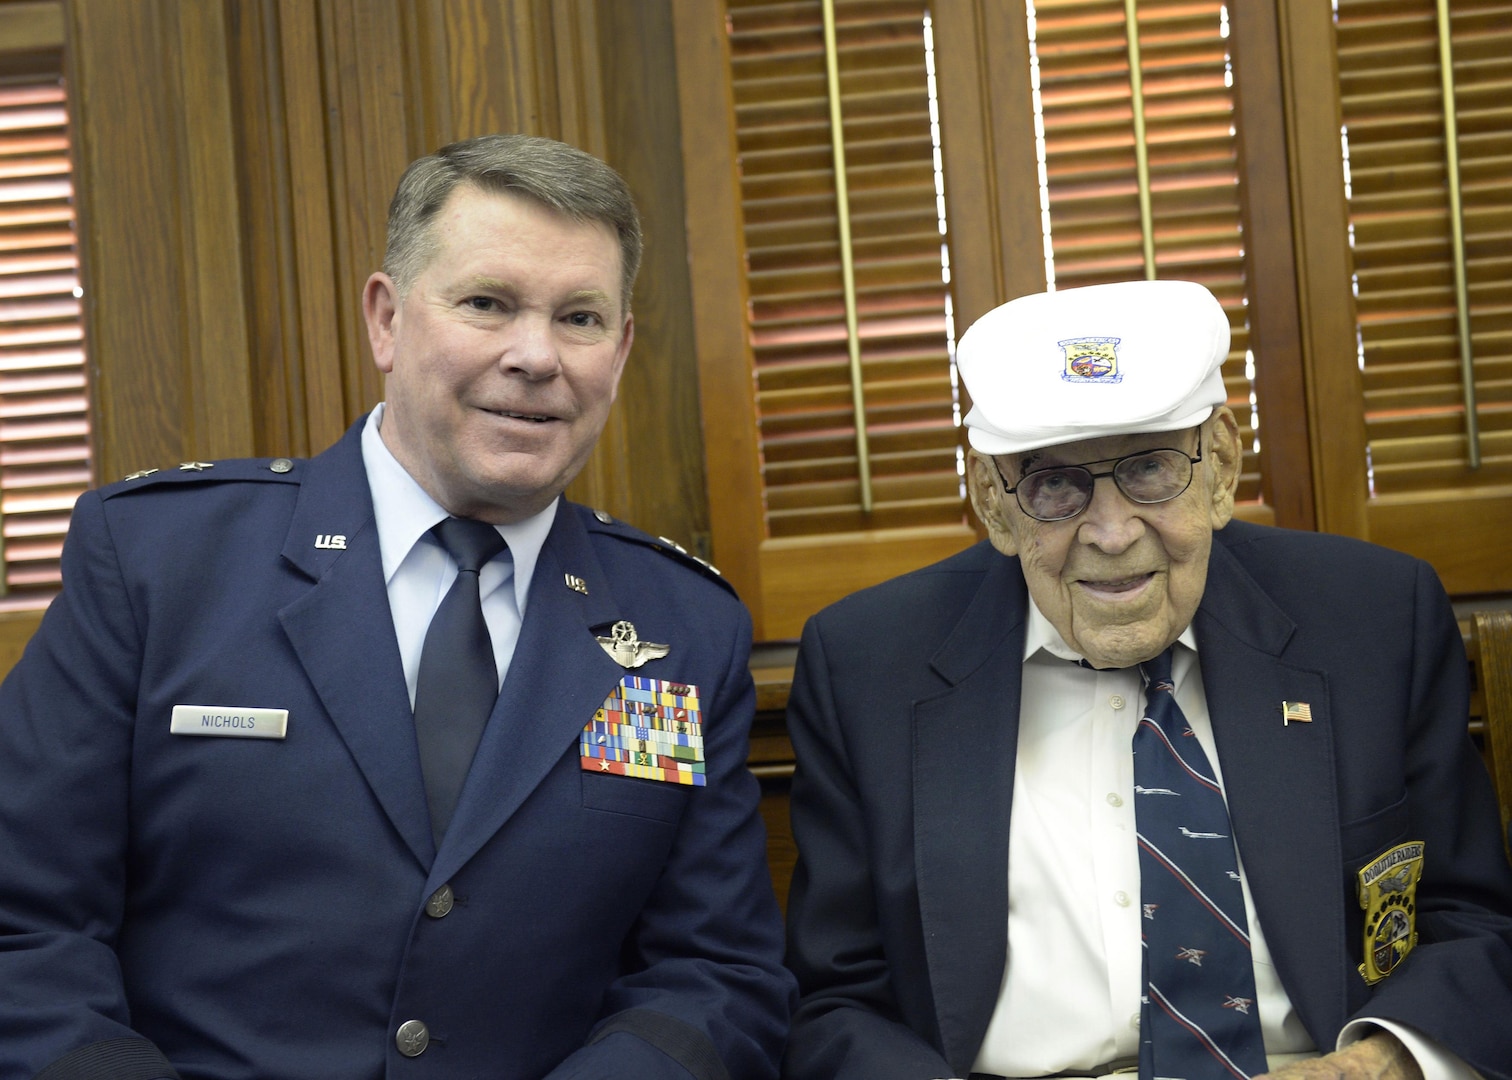 Maj. Gen. John F. Nichols, left, the adjutant general of Texas, sits with retired Lt. Col. Dick Cole prior to a Texas Senate event honoring the Doolittle Raiders of World War II, in Austin, Texas, March 6, 2017. Cole, 101, is the last surviving member of the Doolittle Raid. 